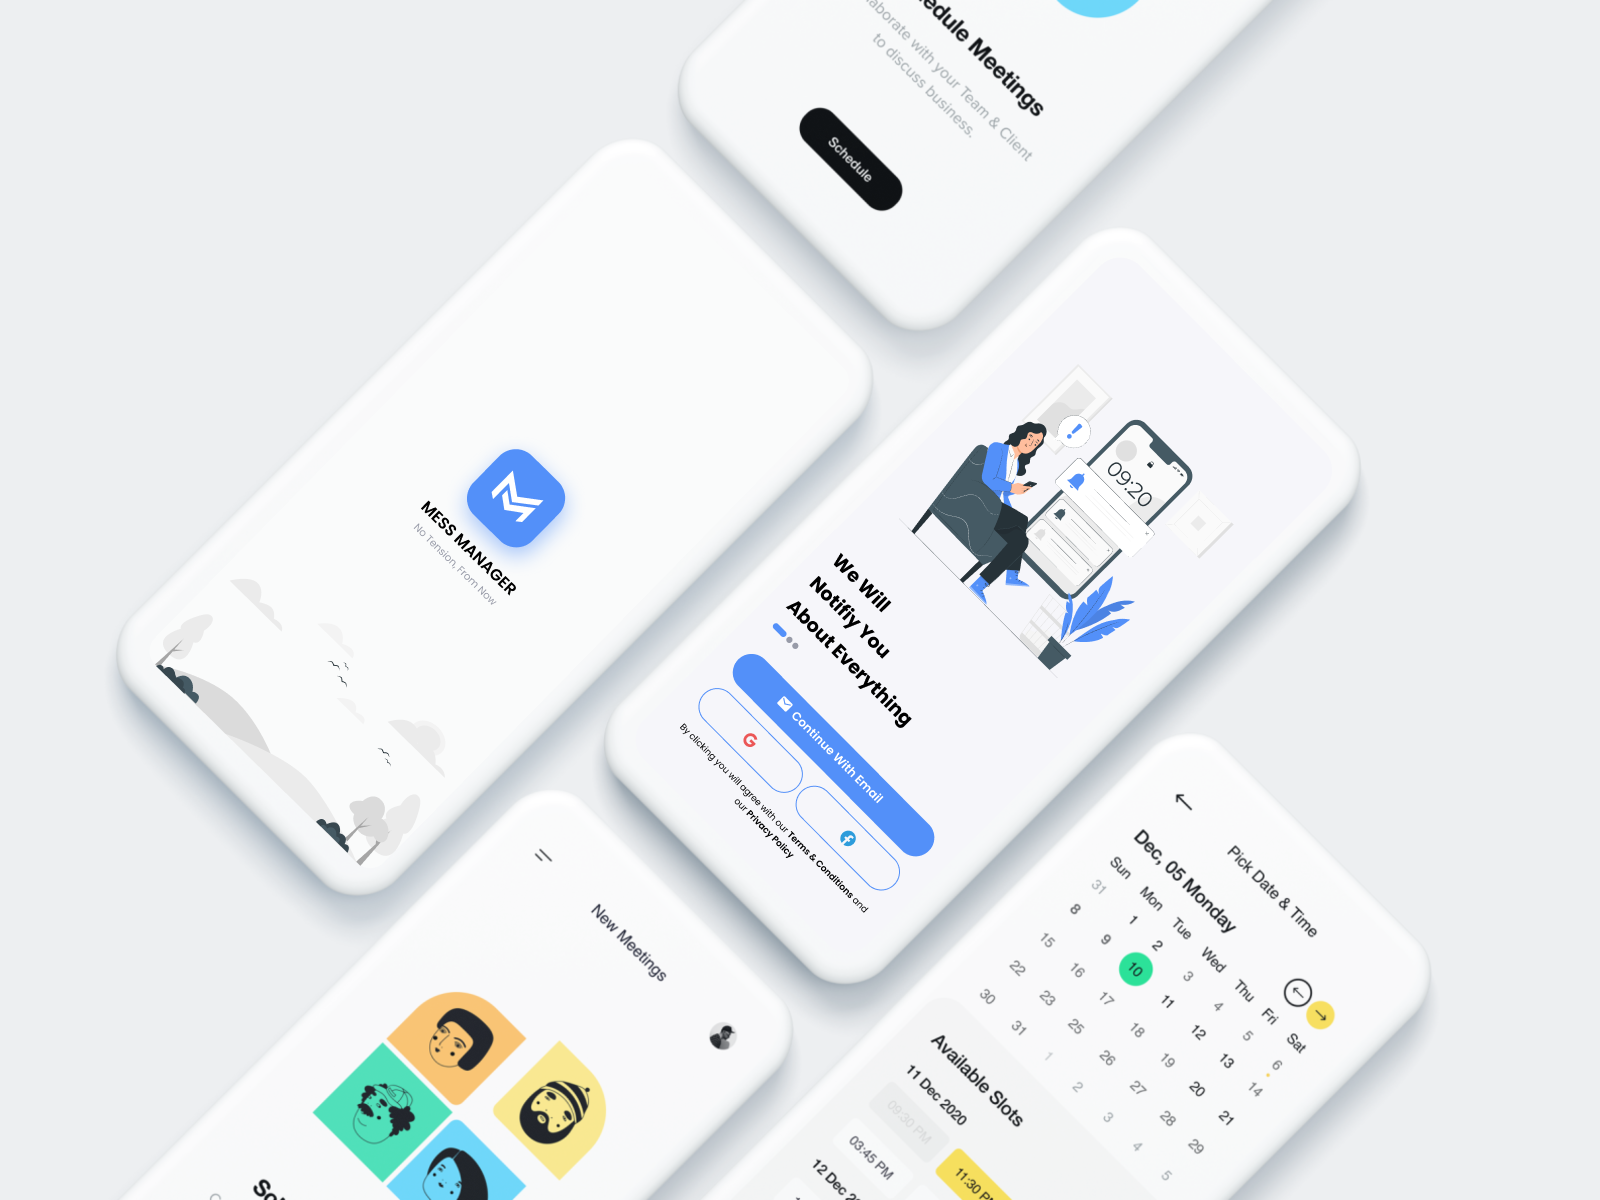 Mess Management UI by Ashik Prottoy on Dribbble